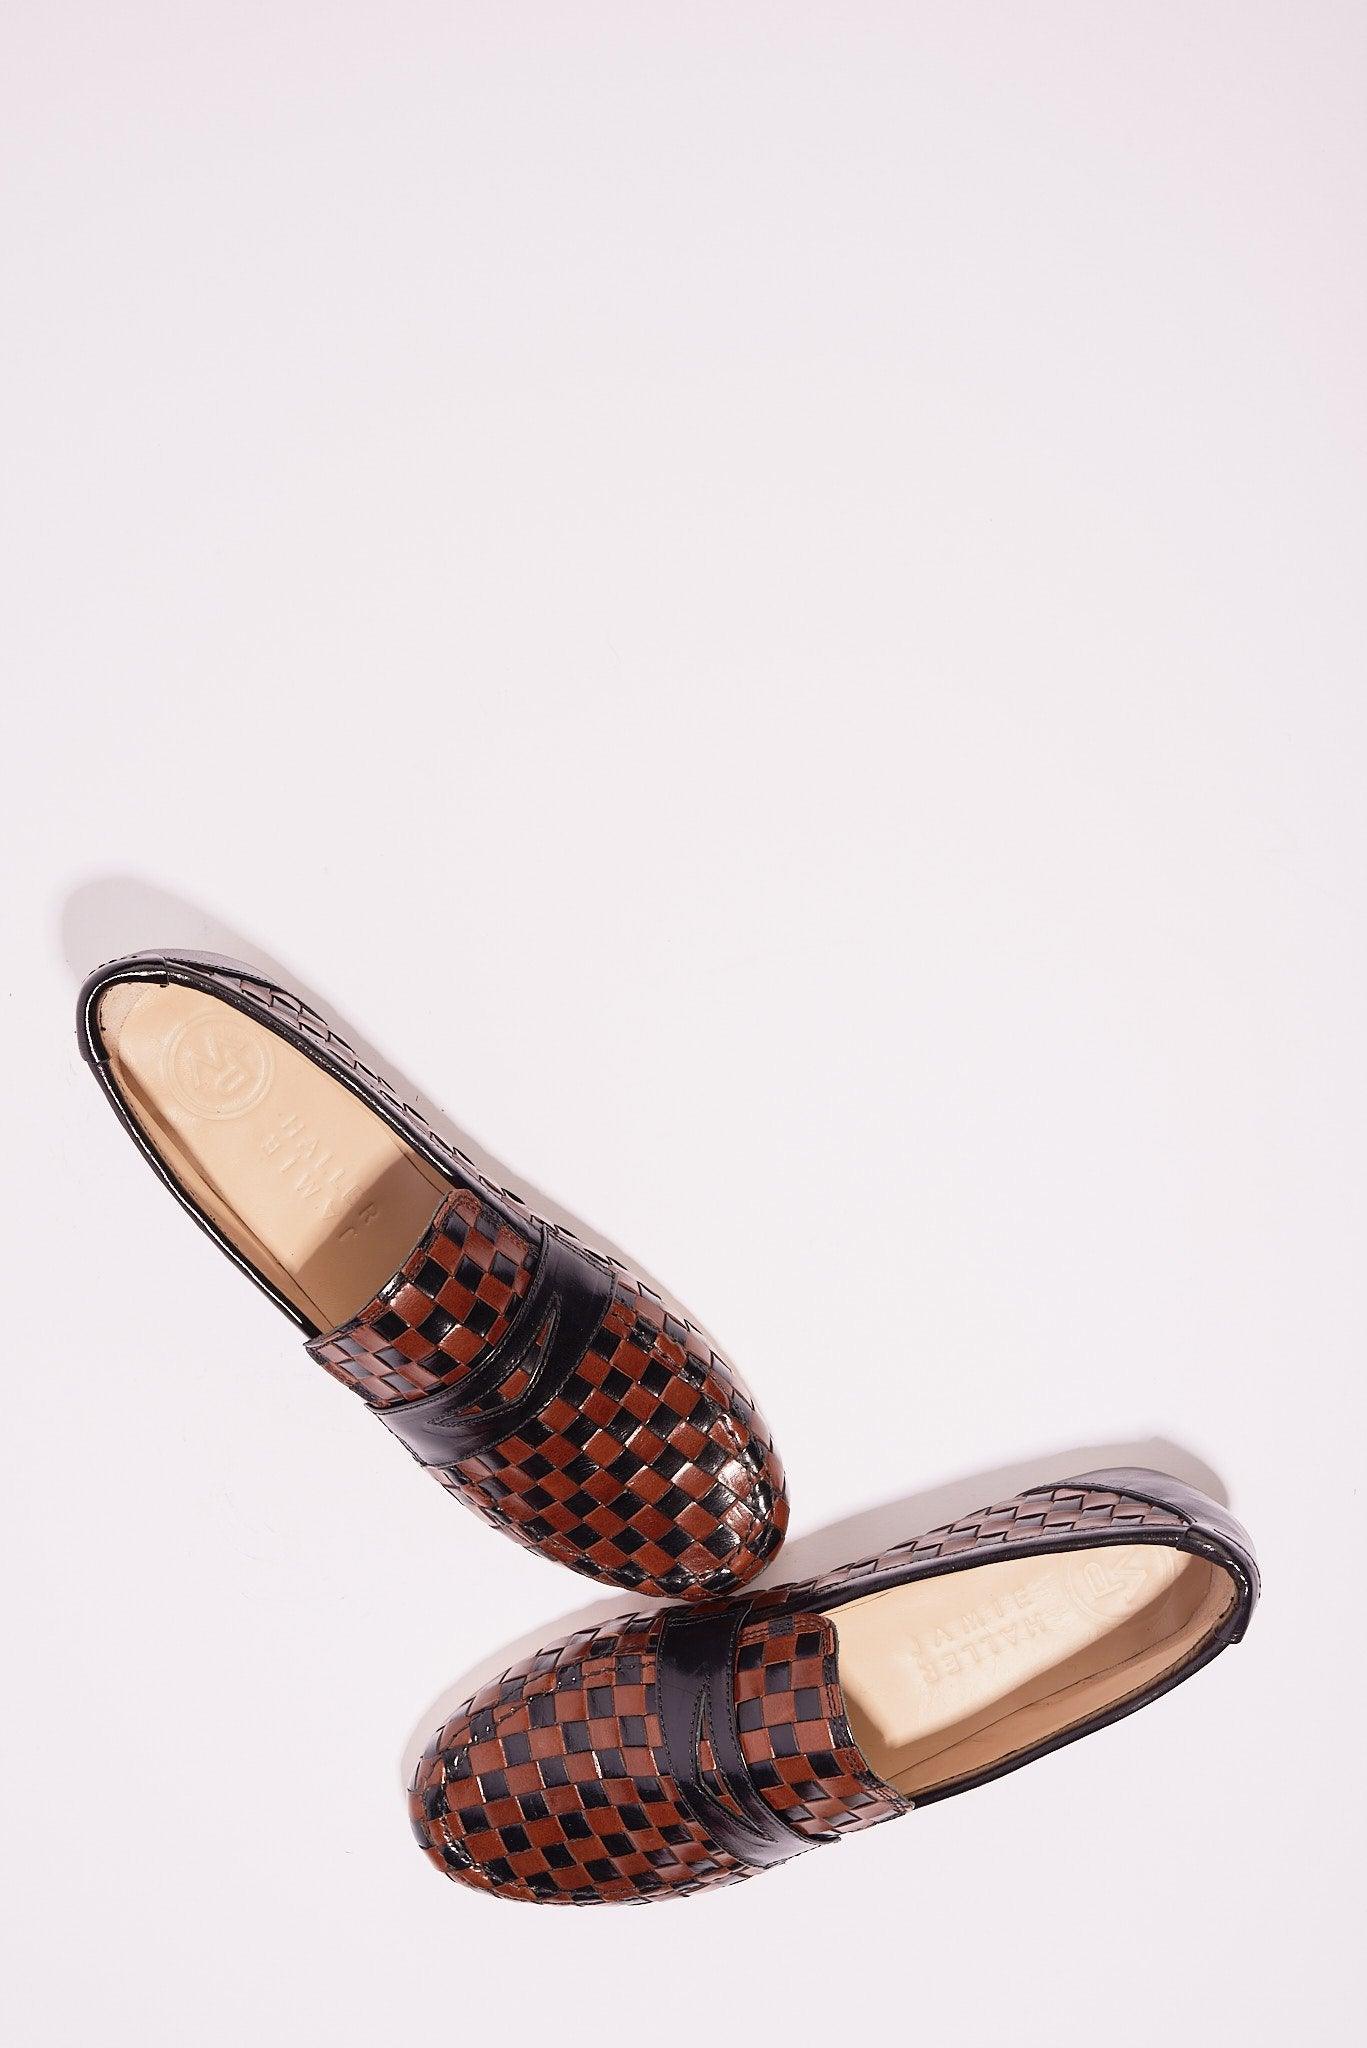 Black and Brown Woven Loafer Flat View on Angle